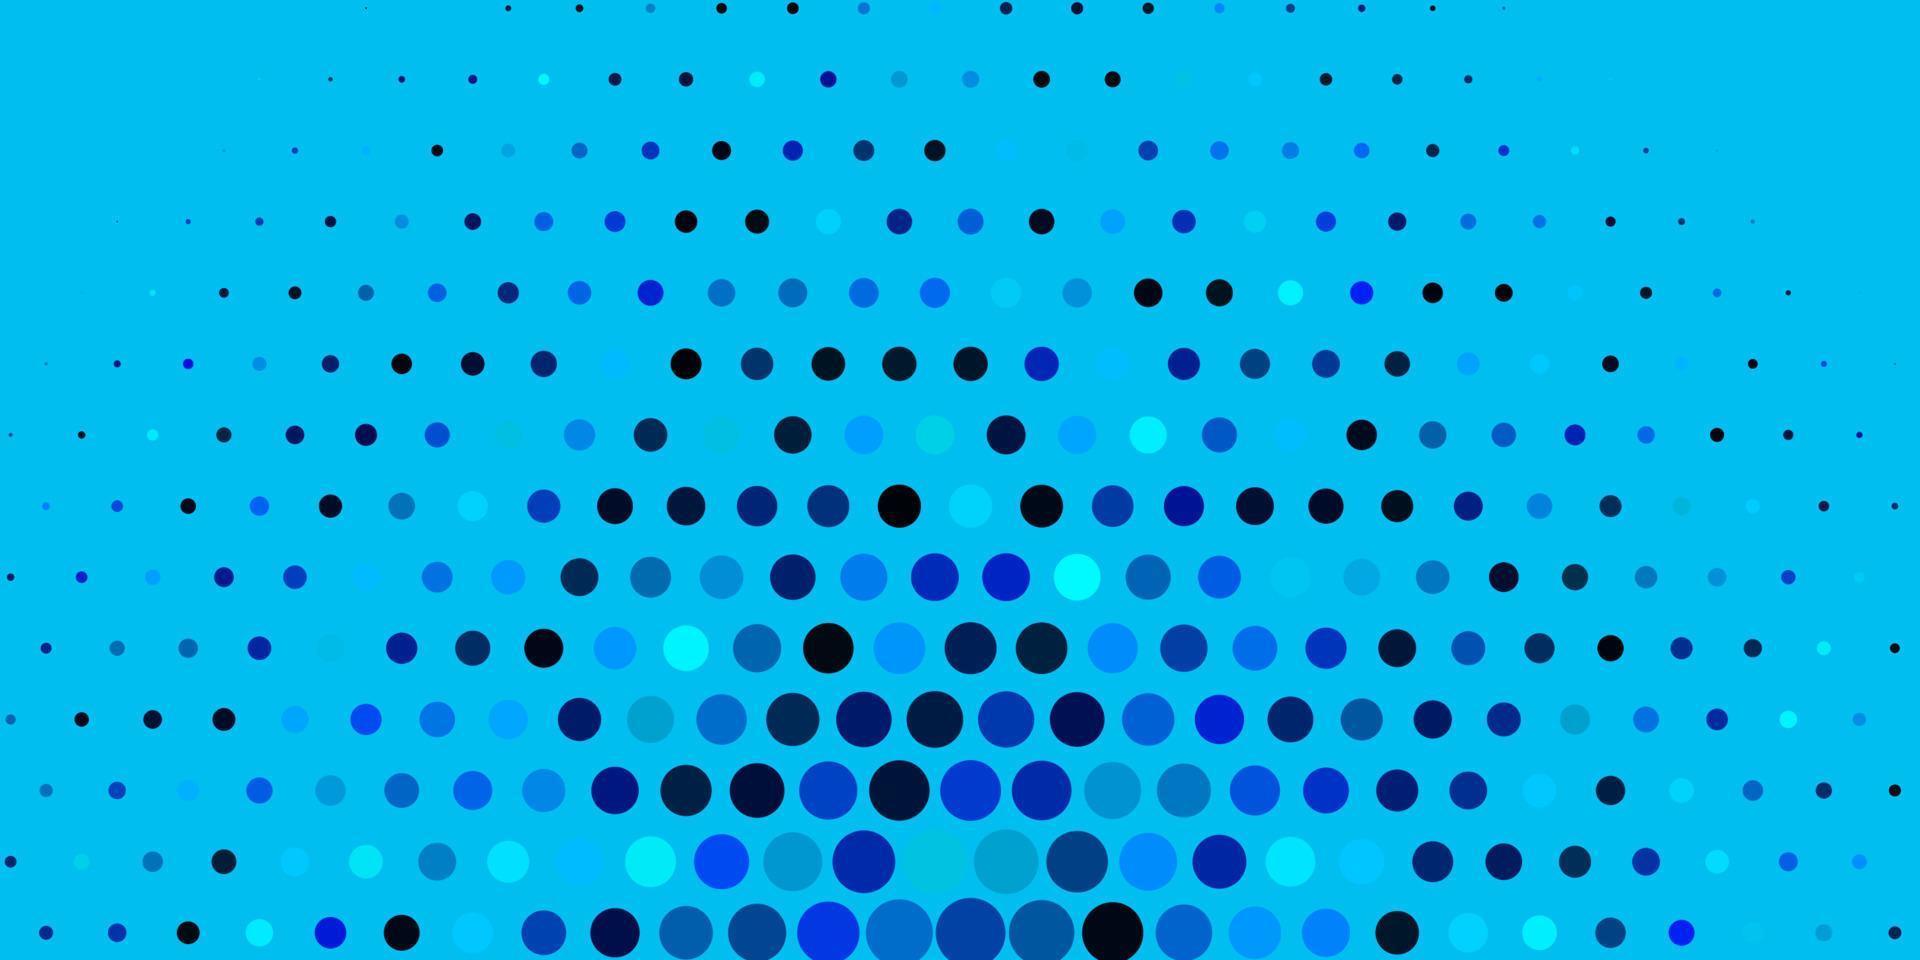 Dark BLUE vector layout with circle shapes.